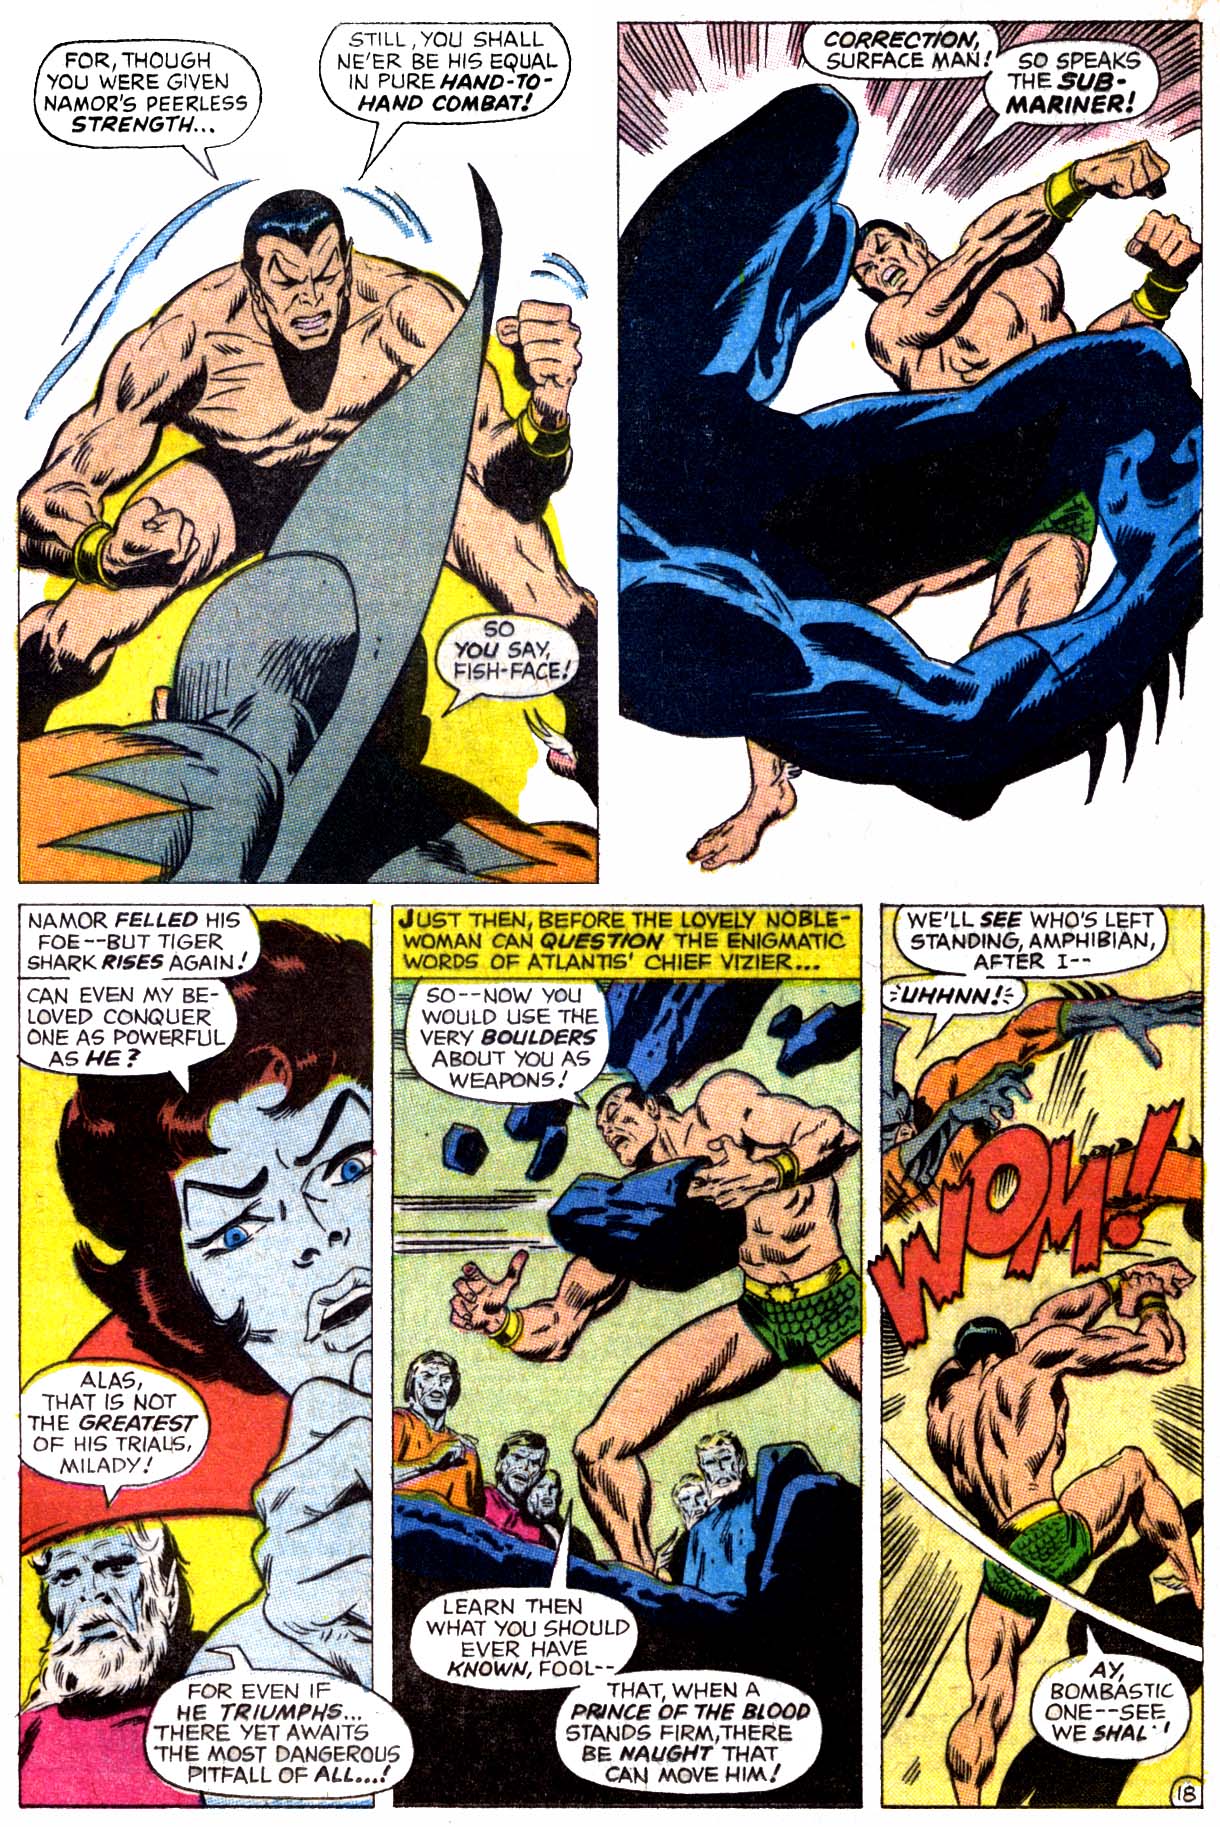 Read online The Sub-Mariner comic -  Issue #6 - 19